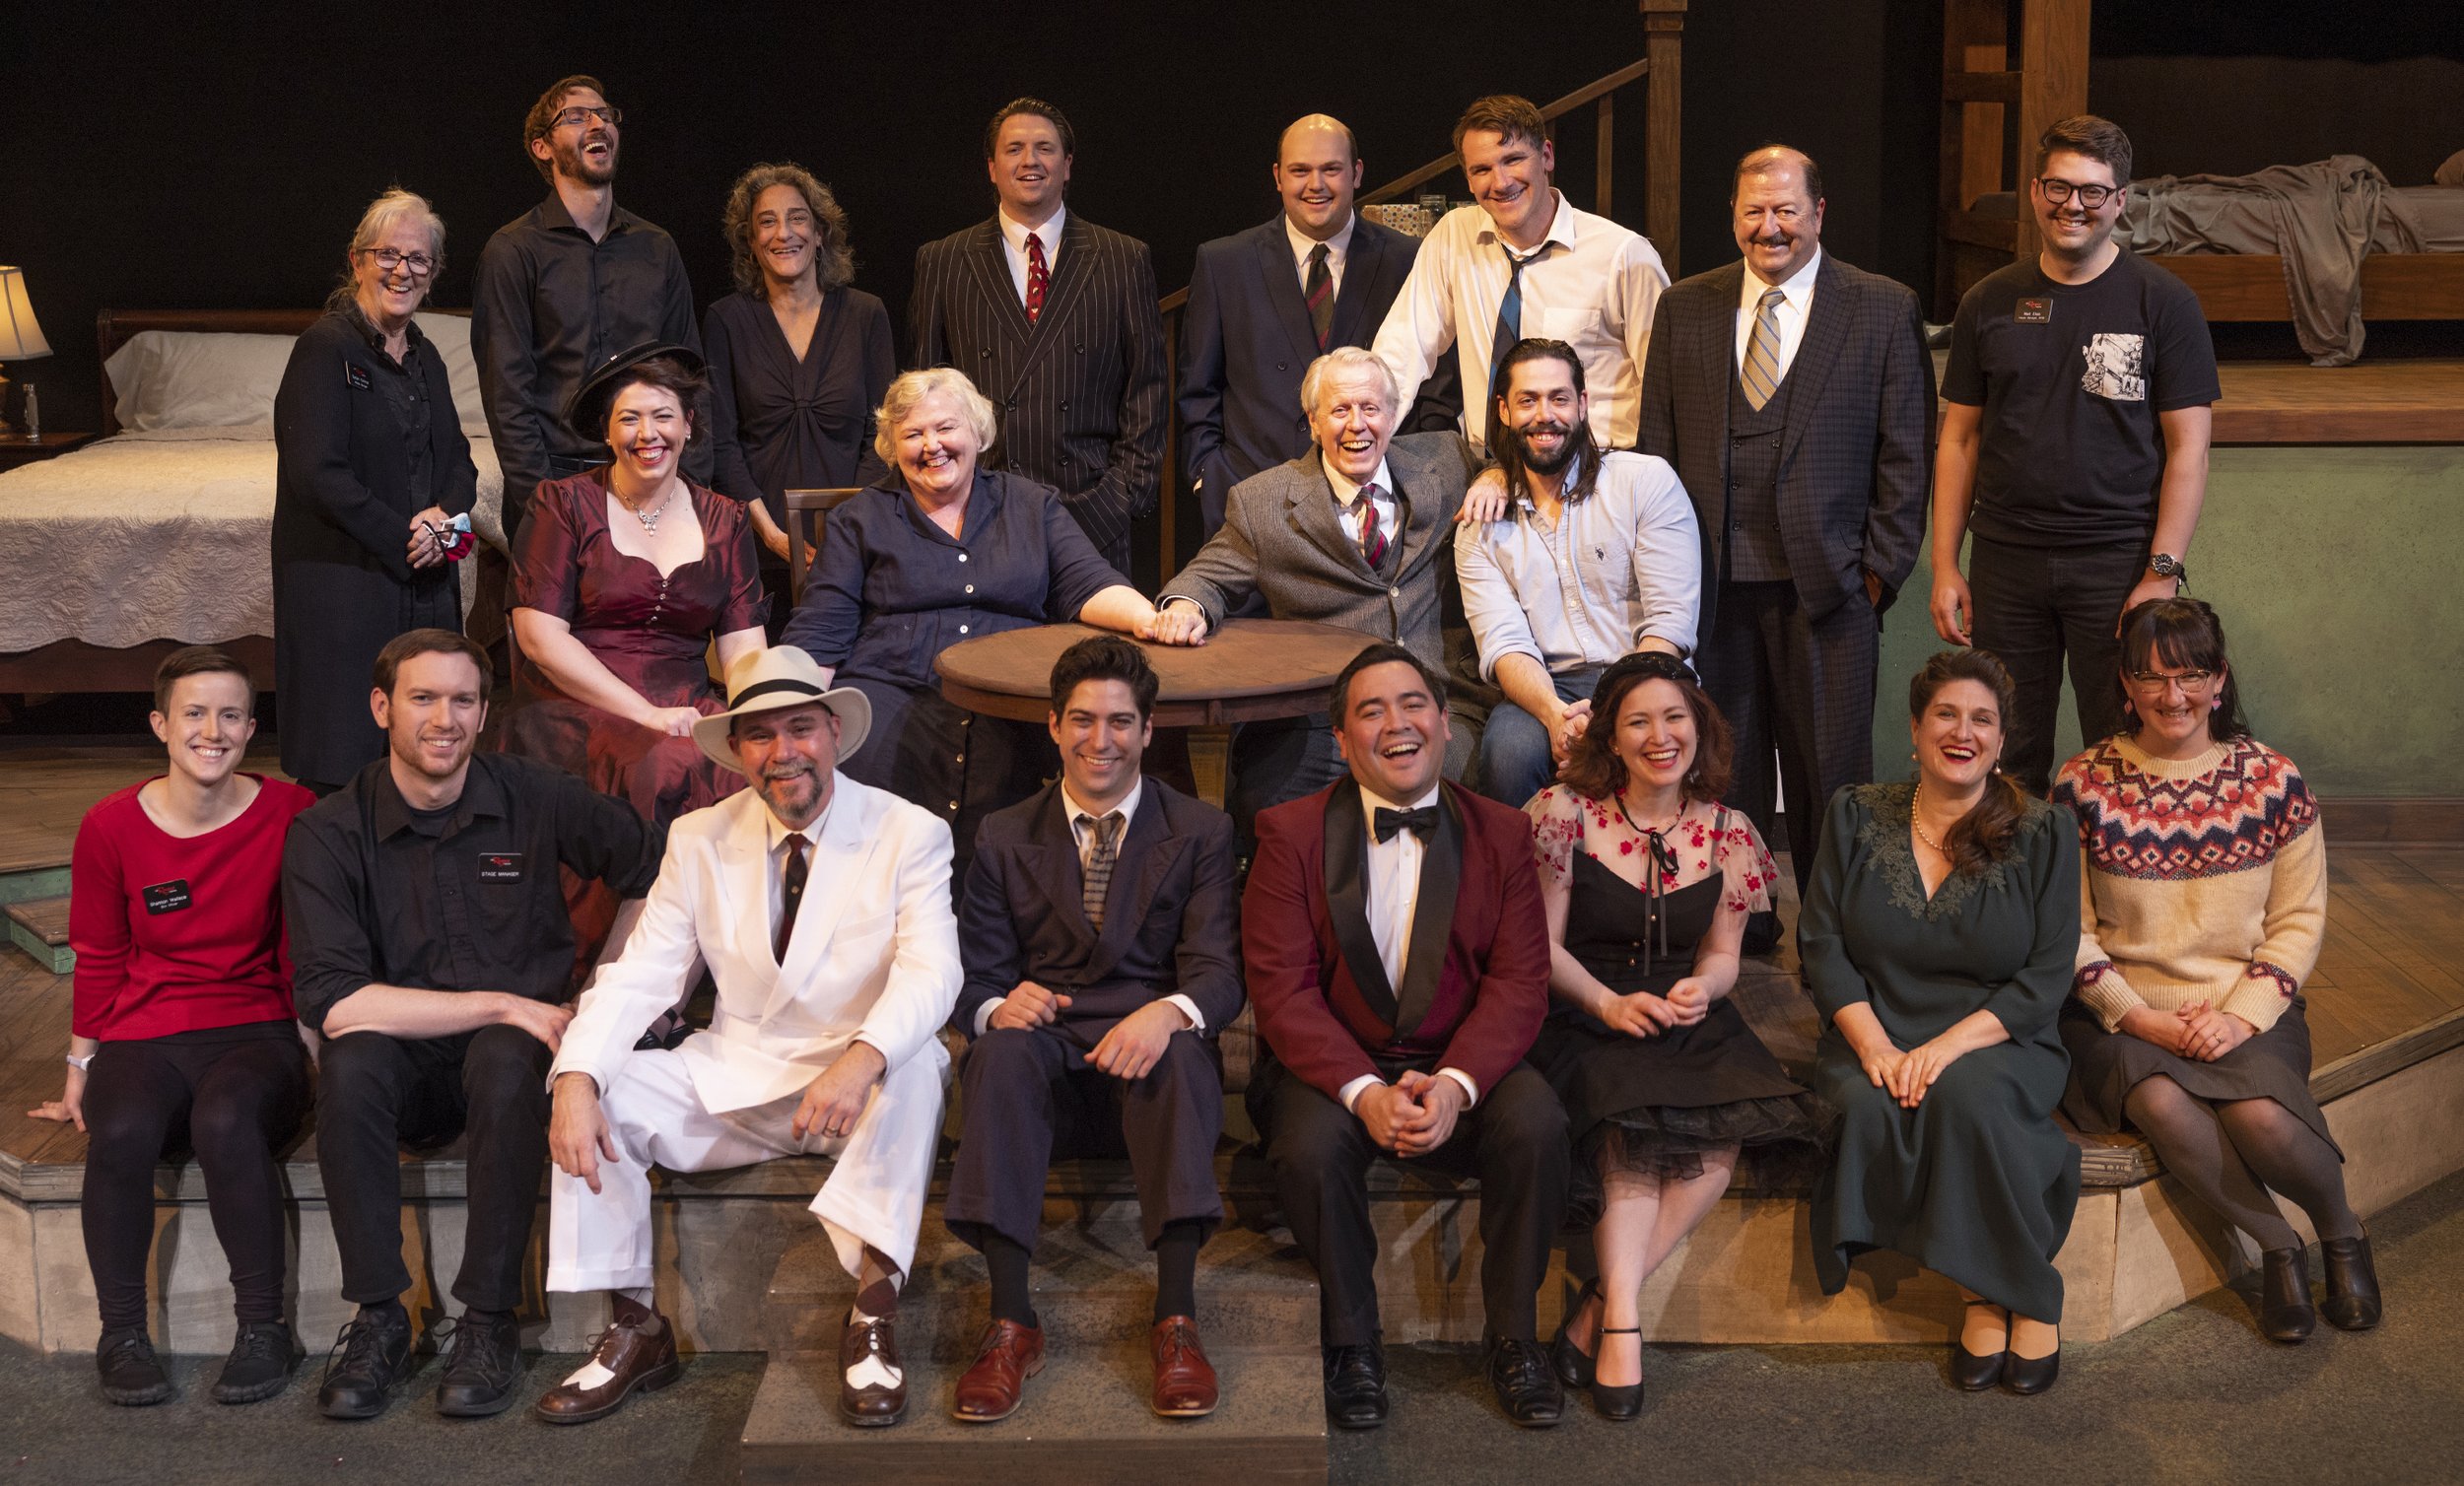 Cast and Crew of "Death of a Salesman." Photo by Tim Fuller.